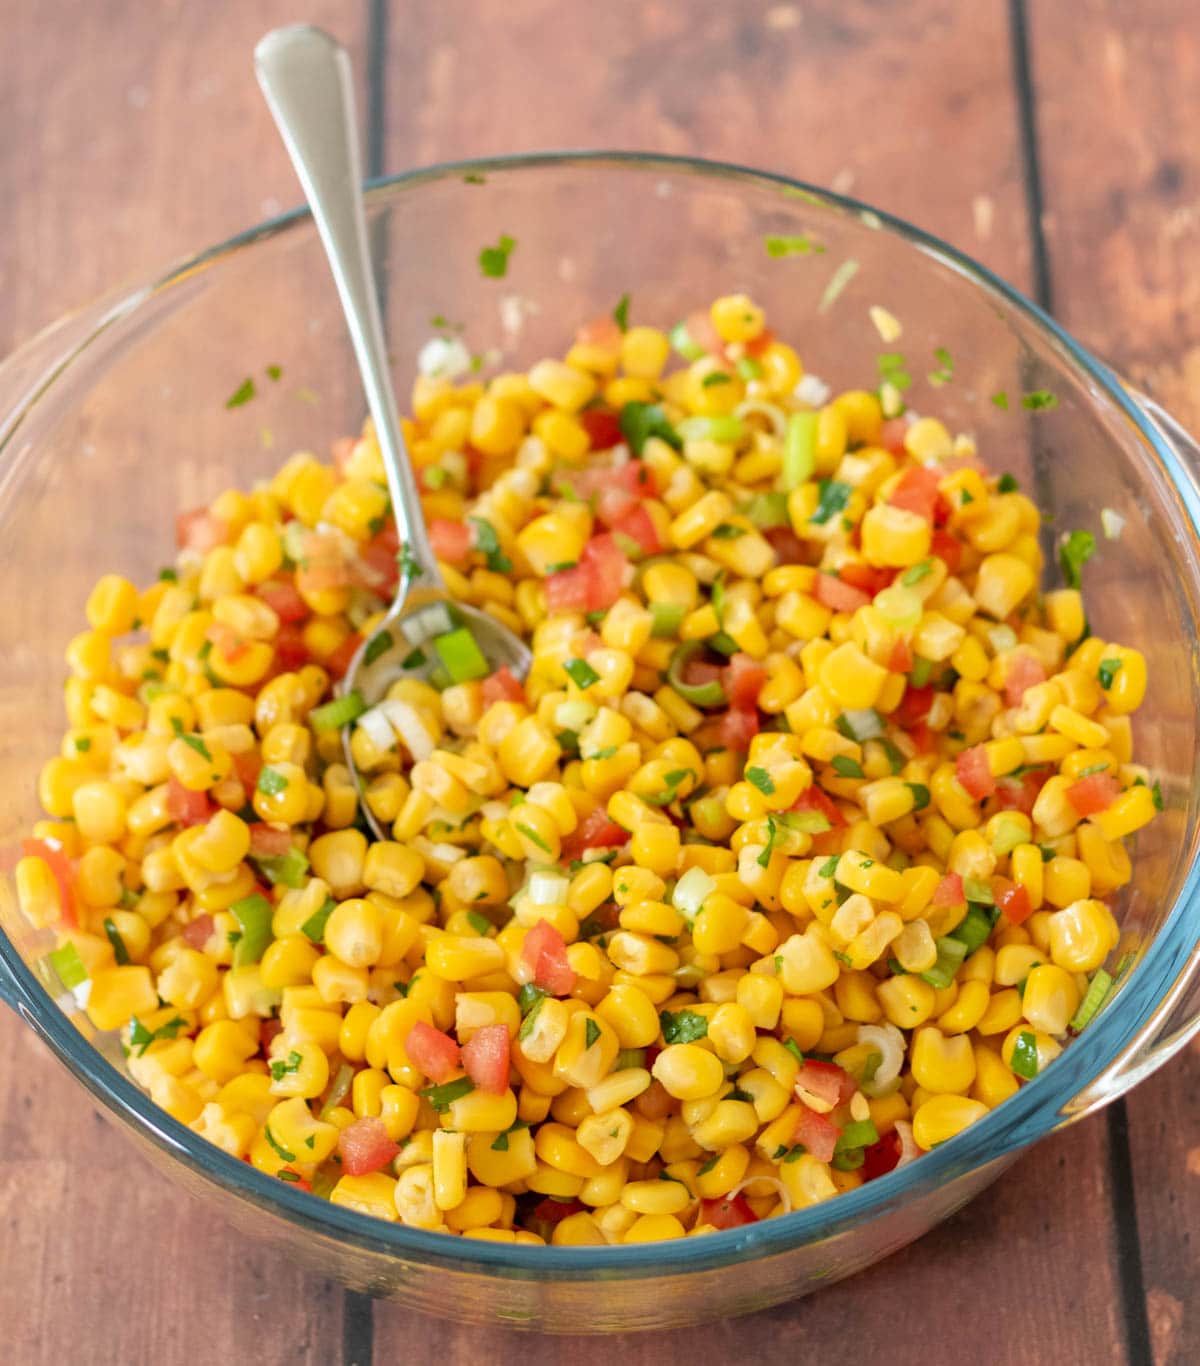 All the corn salsa ingredients placed into a large mixing bowl.